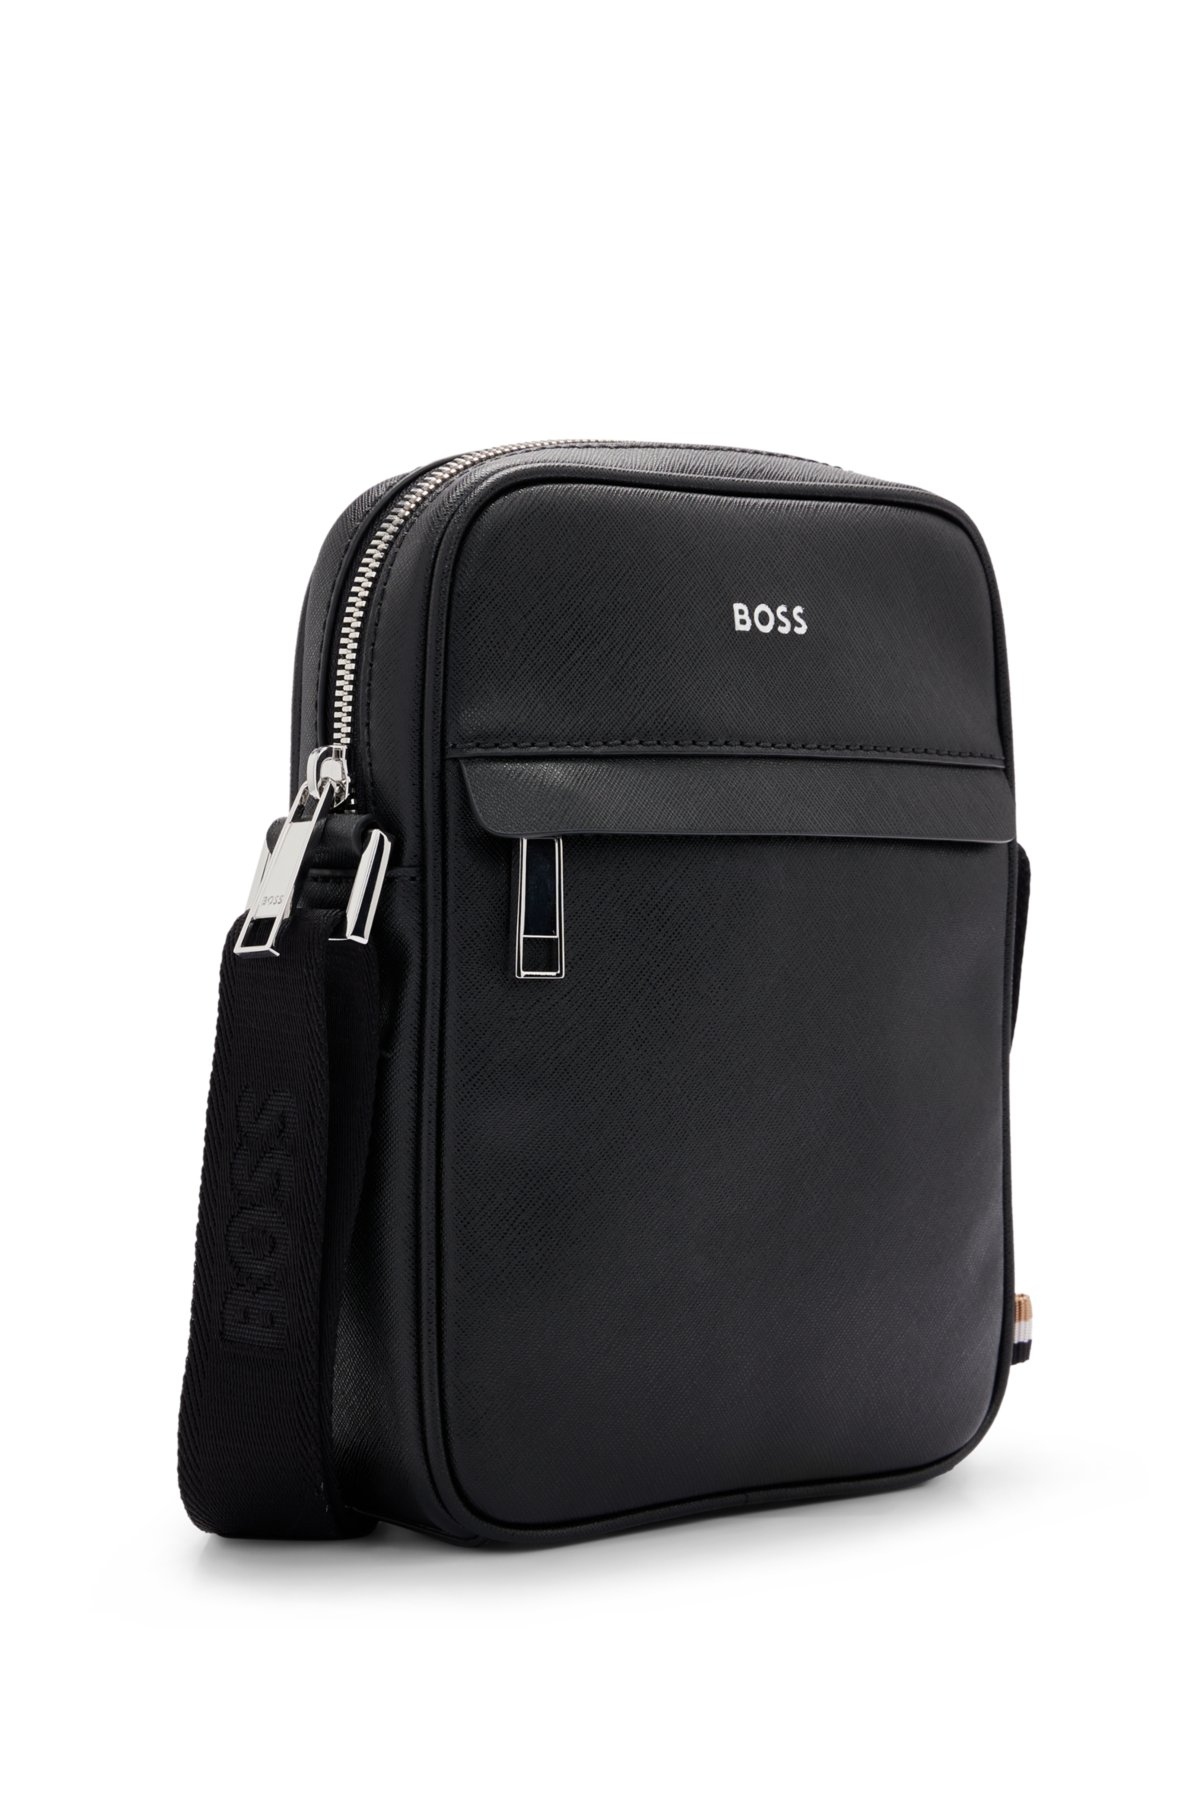 - logo Reporter stripe signature BOSS and bag detail with